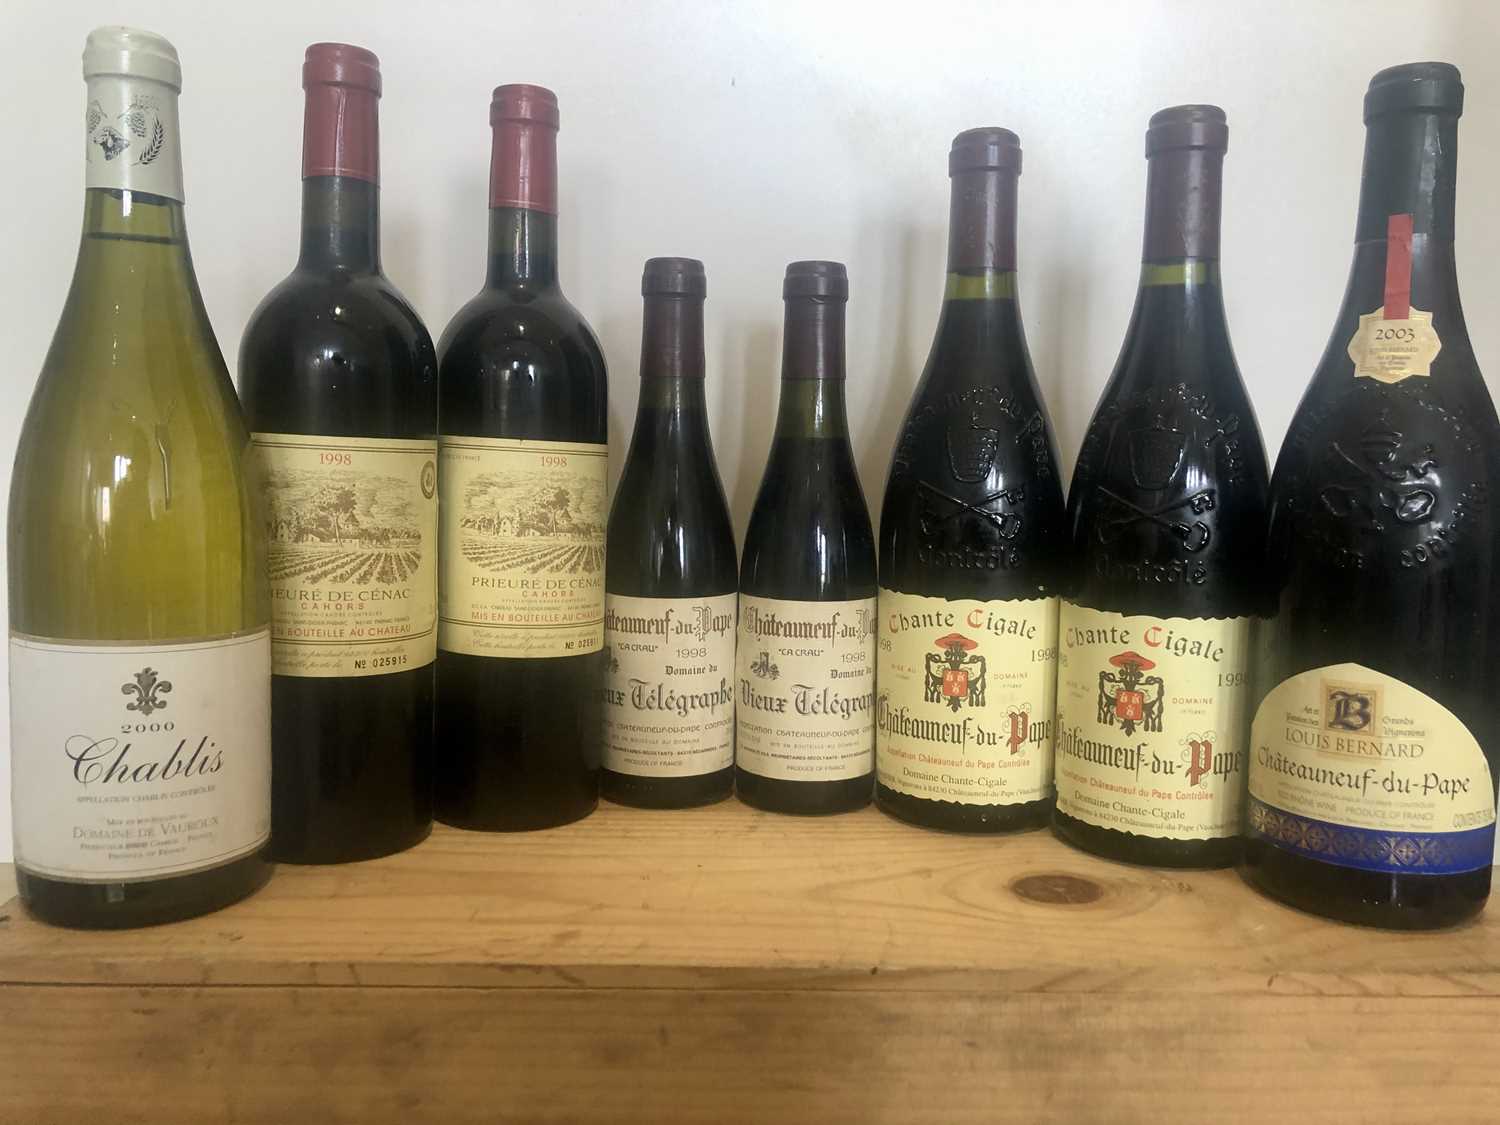 Lot 1 - 8 bottles including half bottles mixed lot good french ‘fine’ wines